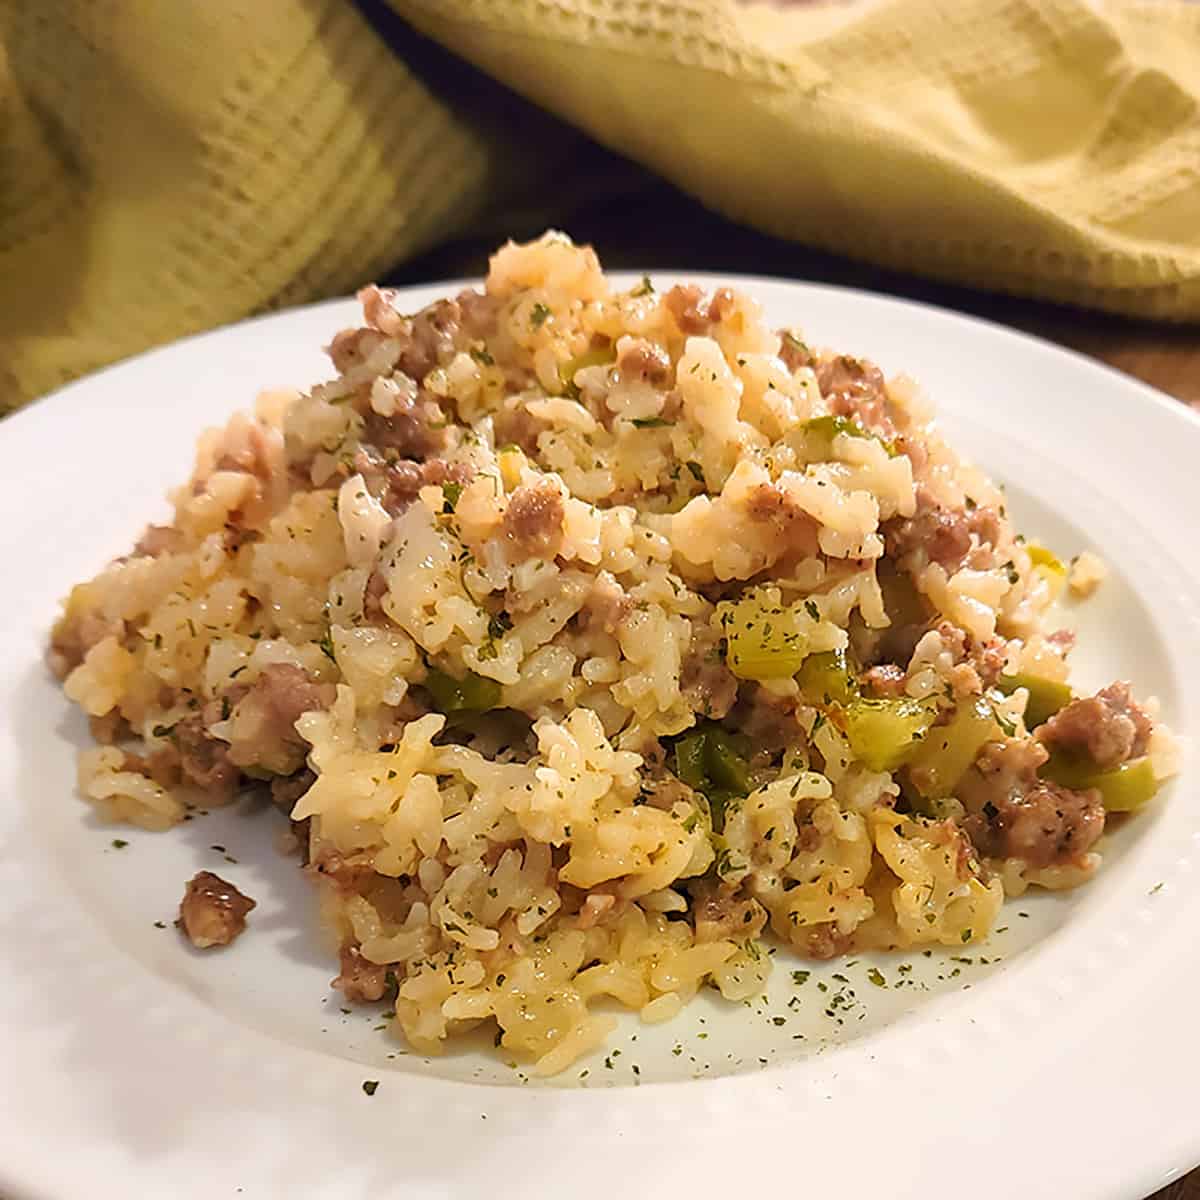 A serving of sausage rice casserole on a white plate.